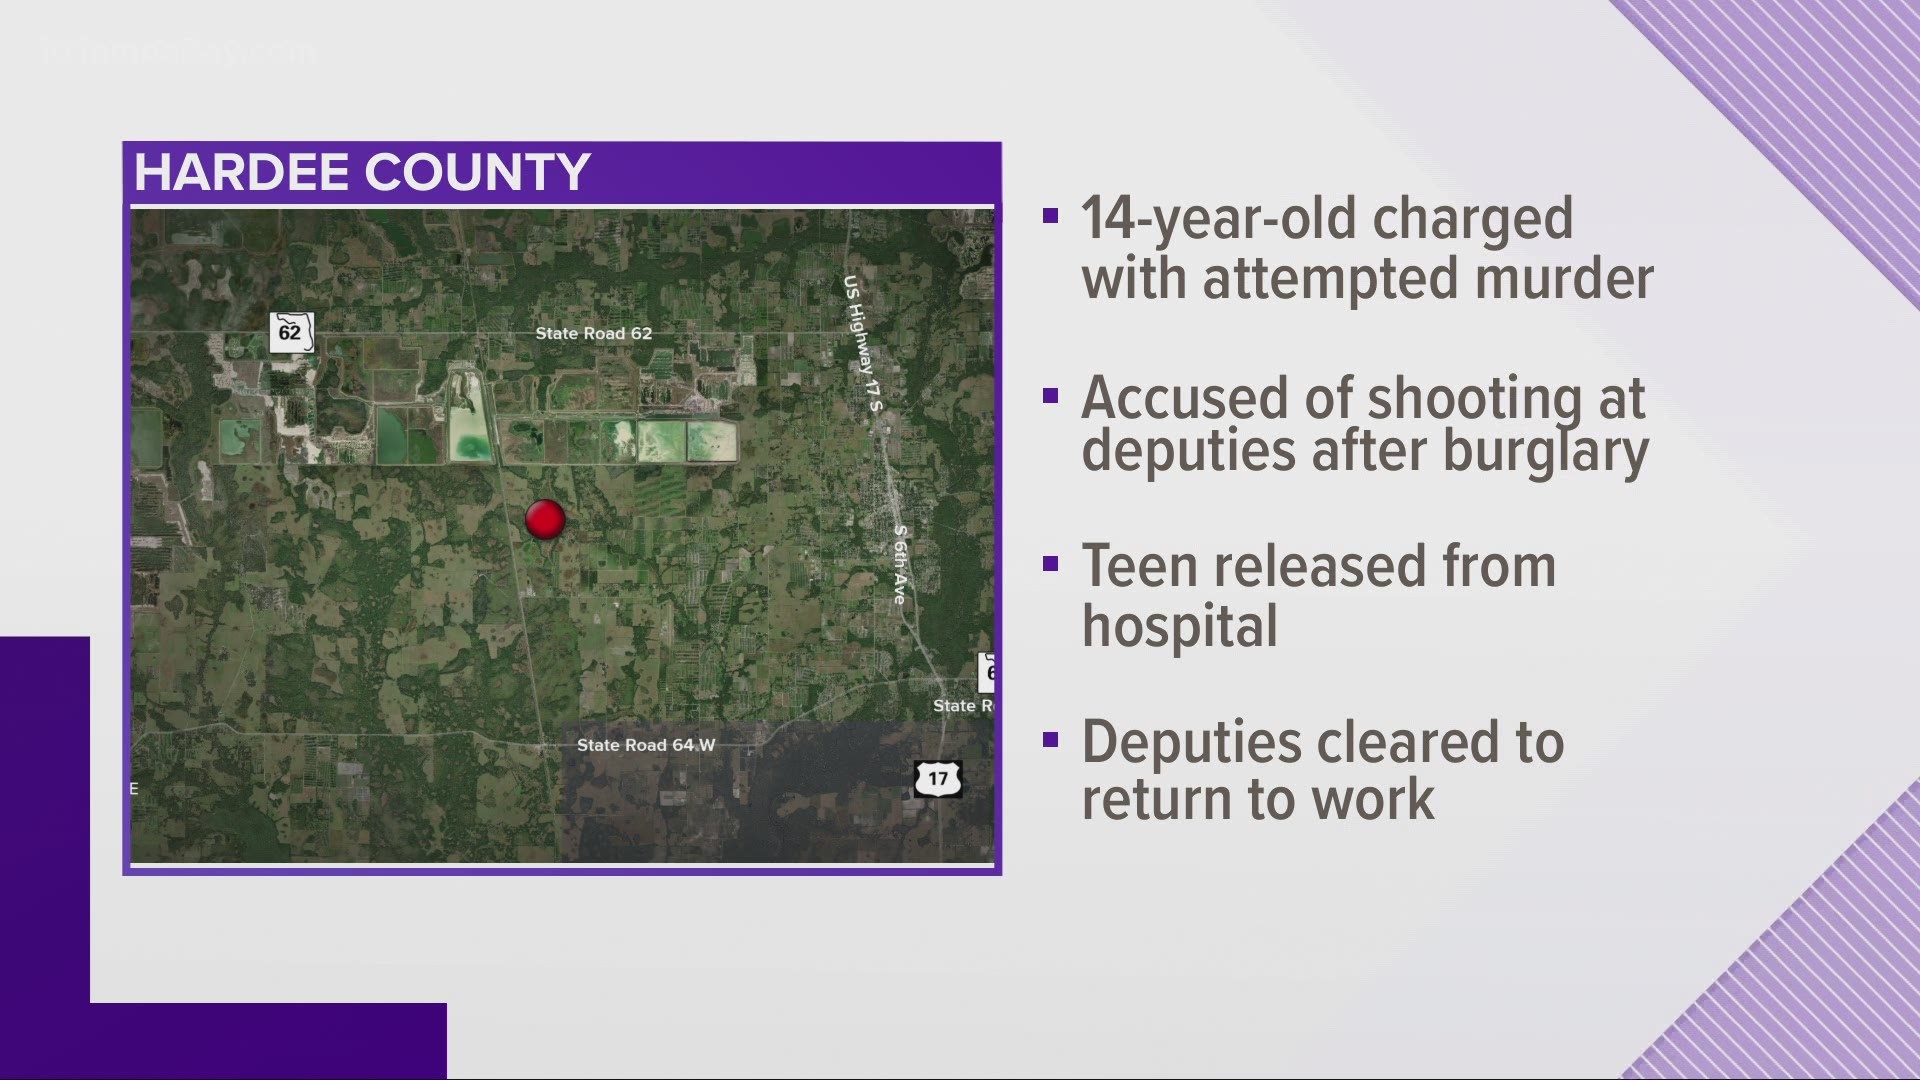 The shootout happened on Nov. 26. The teen has been turned over to the Department of Juvenile Justice.